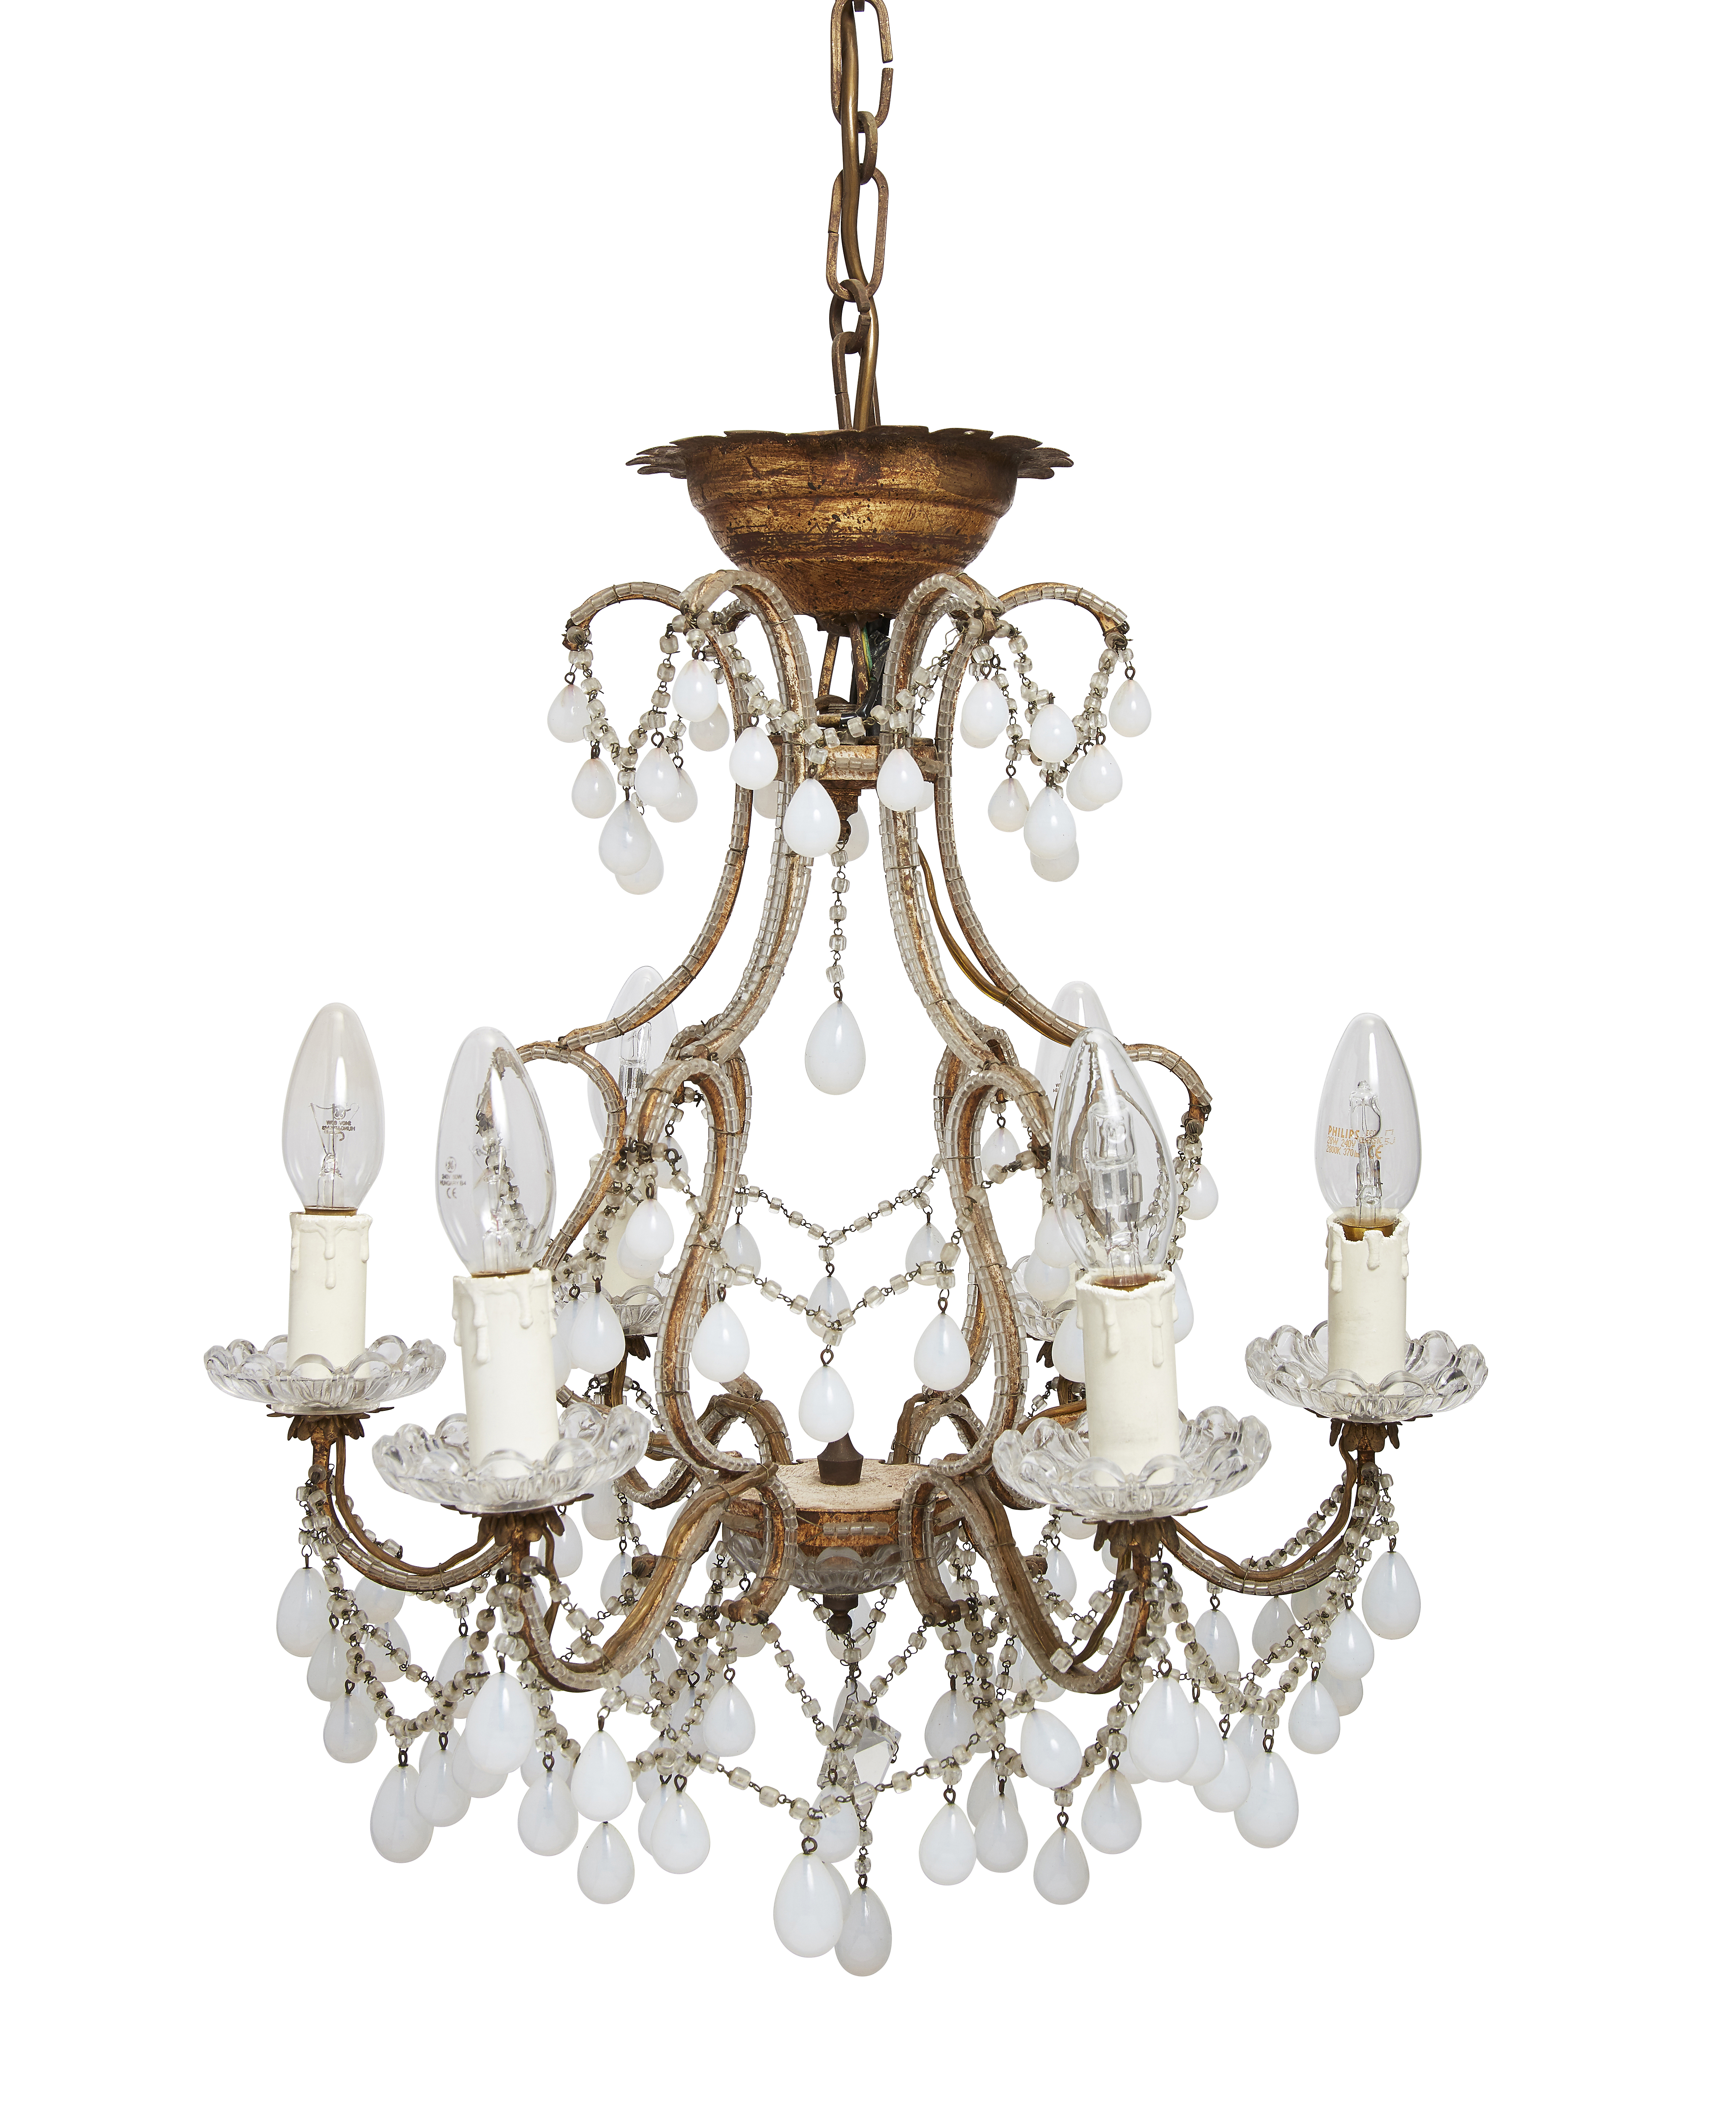 A French gilt metal and glass opaline glass six-light chandelier, late 19th century, with beaded ...